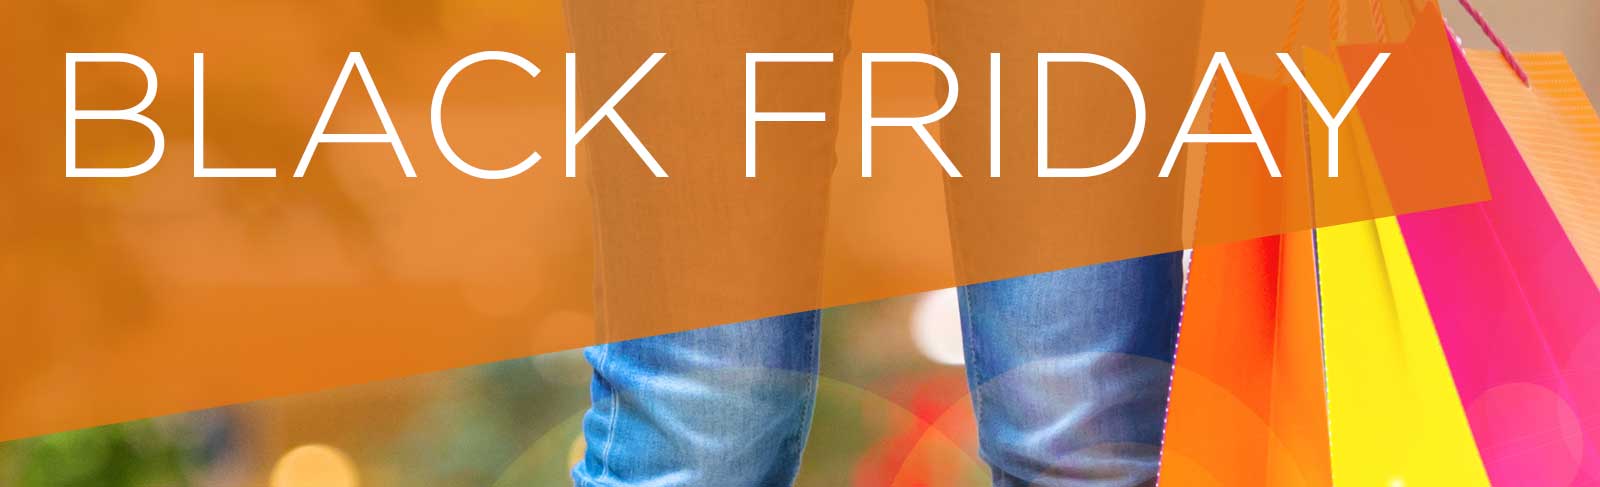 Black Friday 2017 Walk To These Awesome Sales From Millenia 